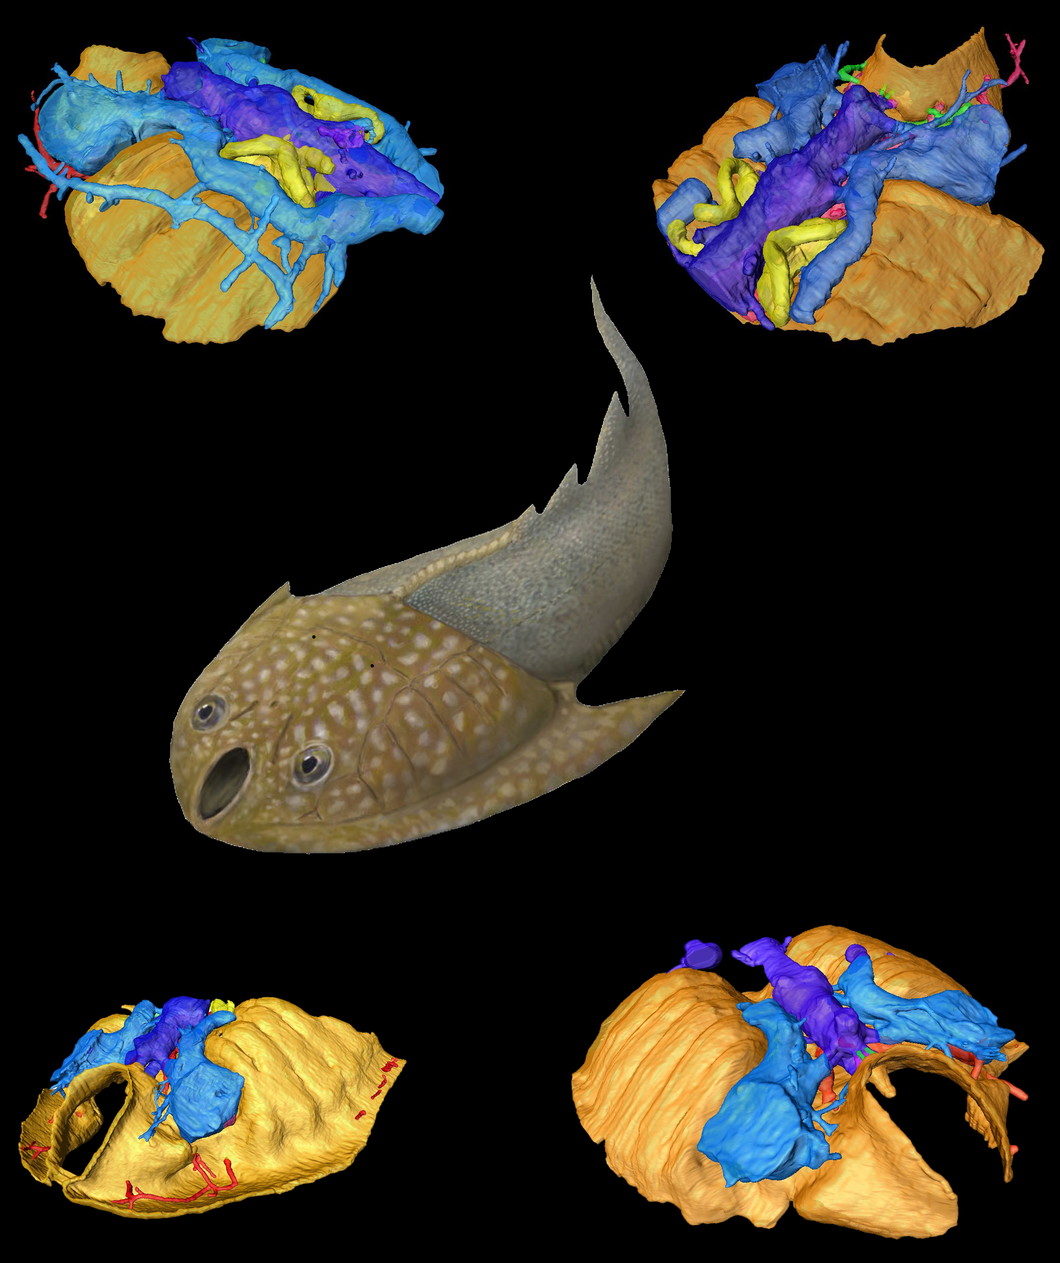 Artistic reconstruction of the galeaspid animal together with different views of the digital model of its brain and sense organs. (Source: Philip Donoghue, University of Bristol)